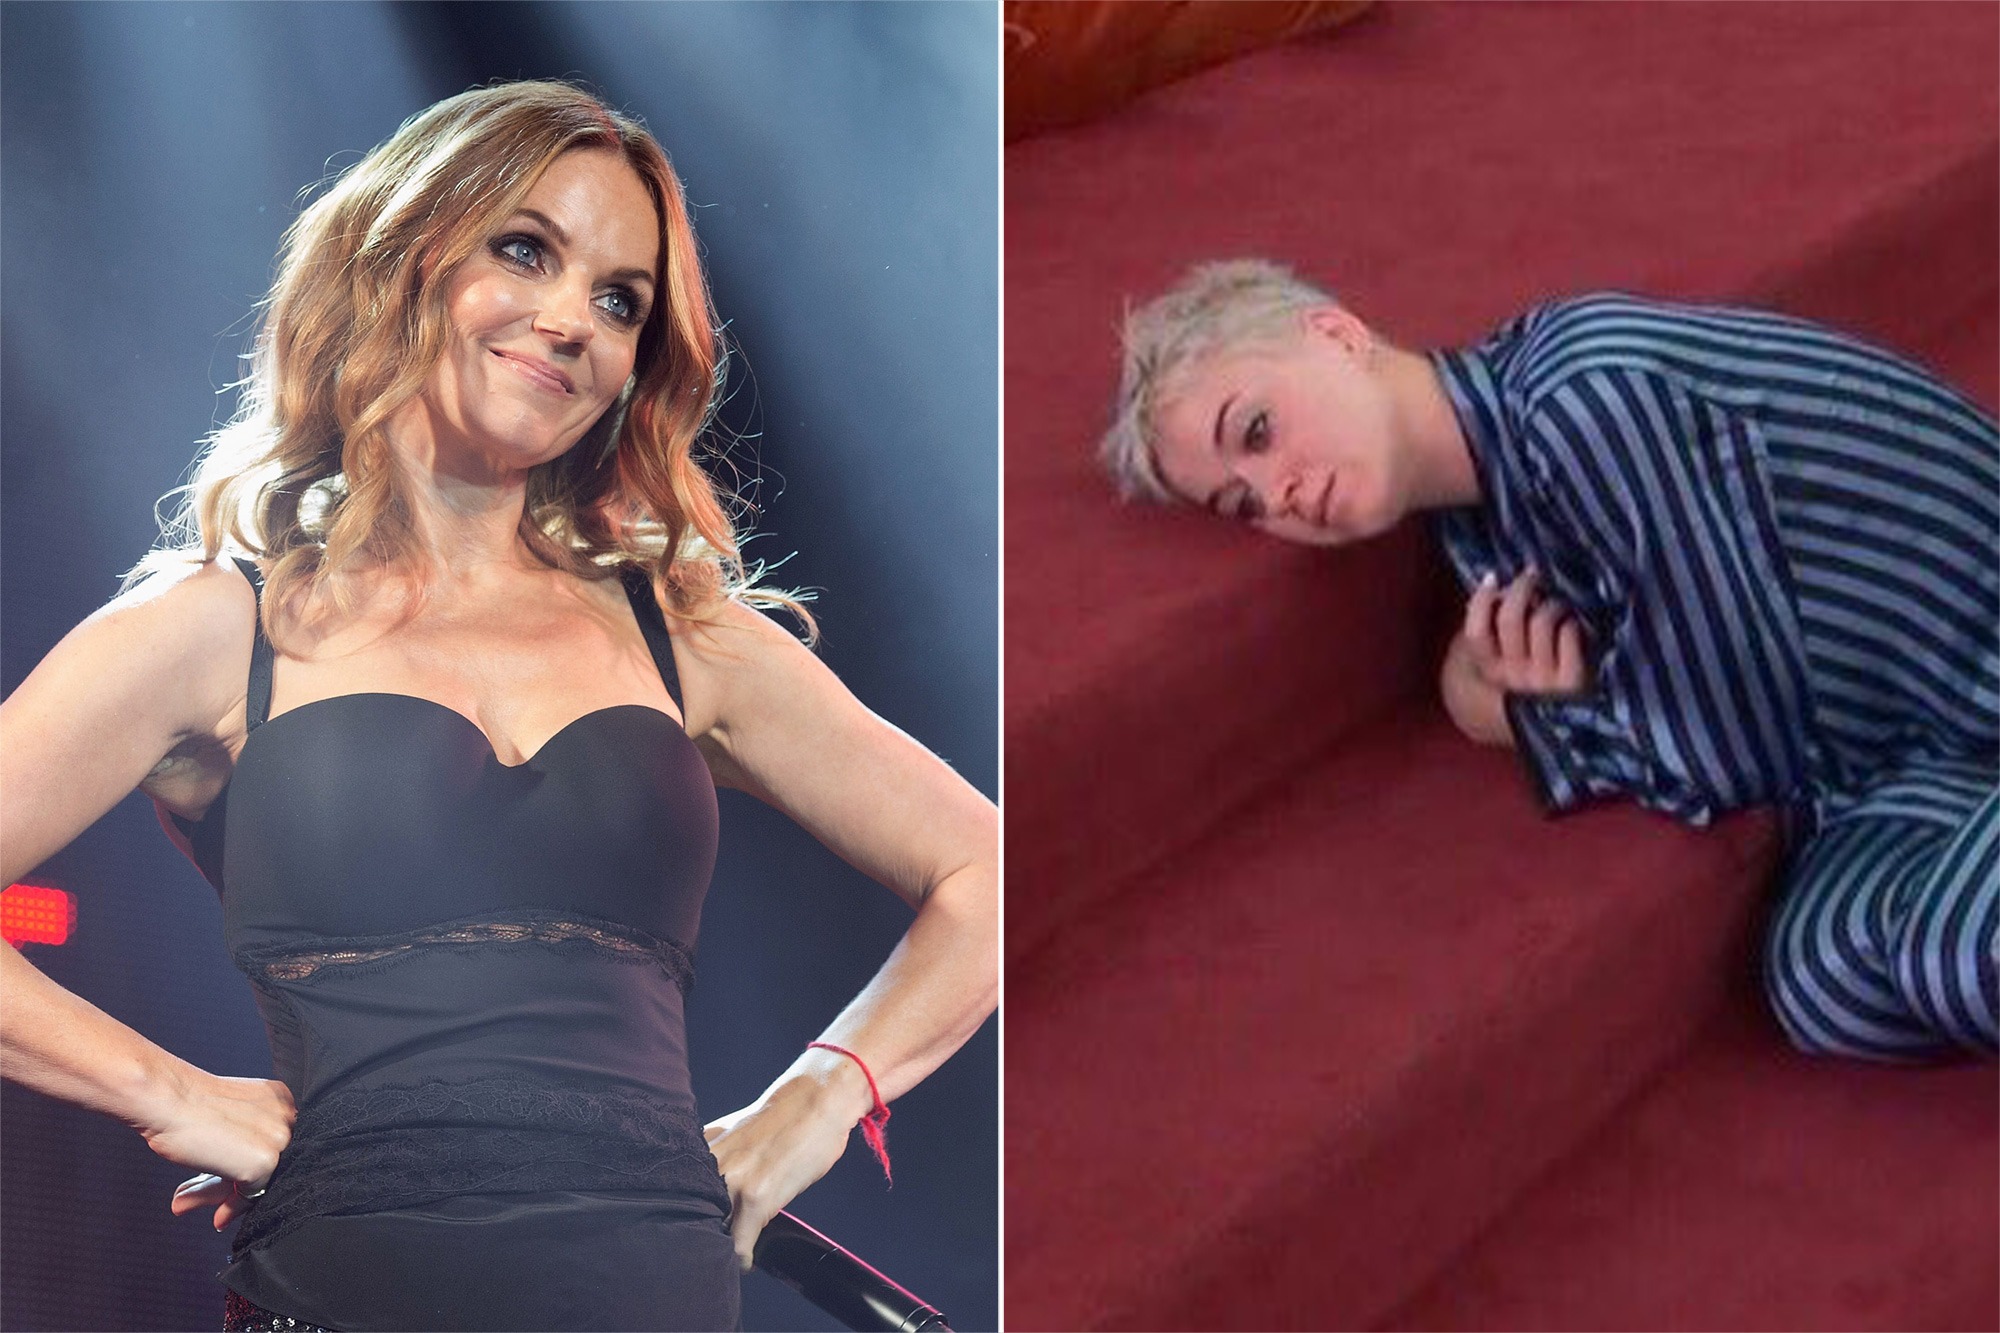 Geri Halliwell responds to Spice Girls' texts with Katy Perry memes when she's confused